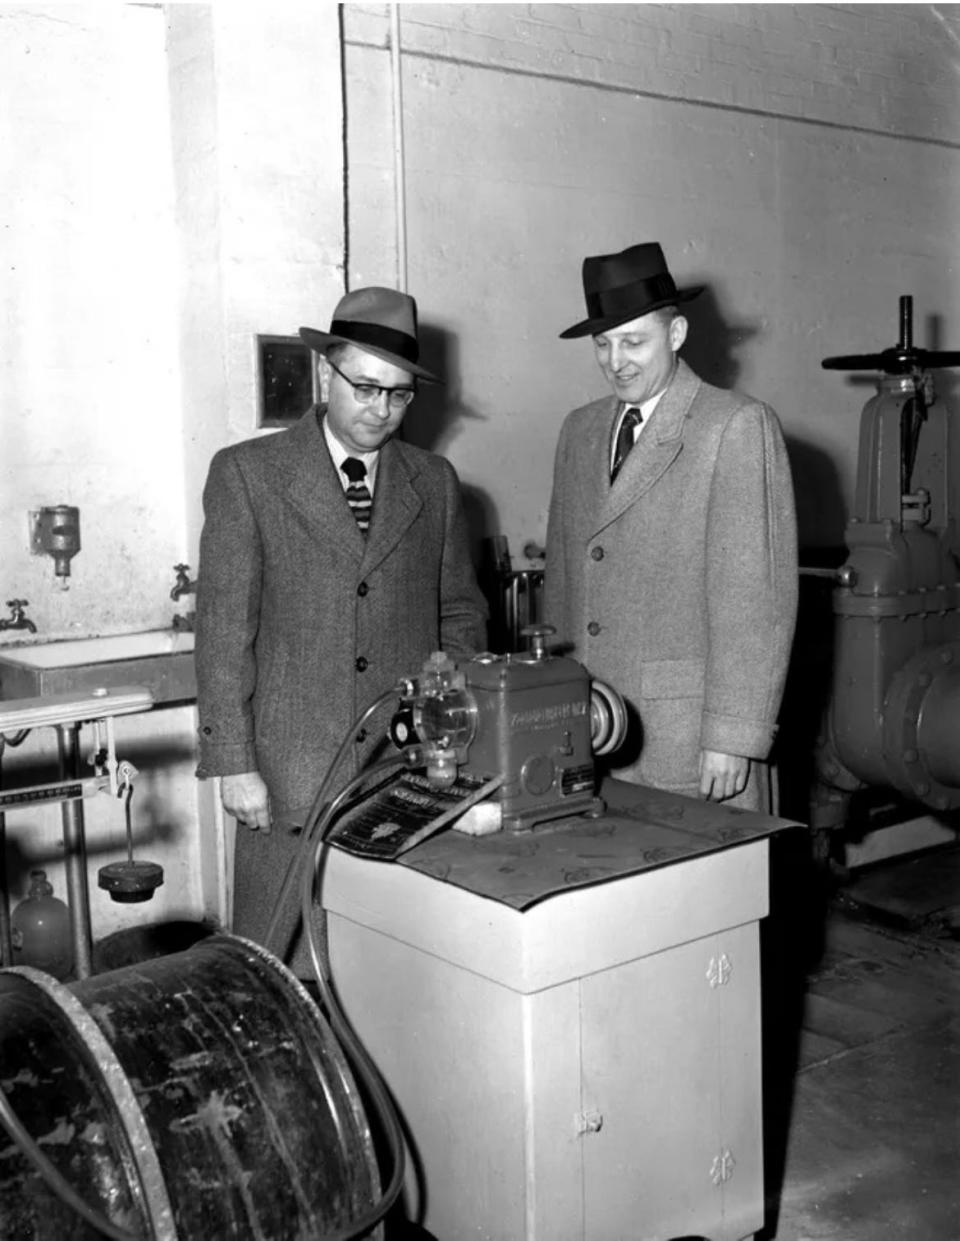 This simple apparatus was at the heart of the city's new fluoridation program more than seven decades ago. Checking its operation in March 1952 are A.E. Ransom, left, then water superintendent, and Dr. H.W. McConnell, then president of the Canton Dental Society.